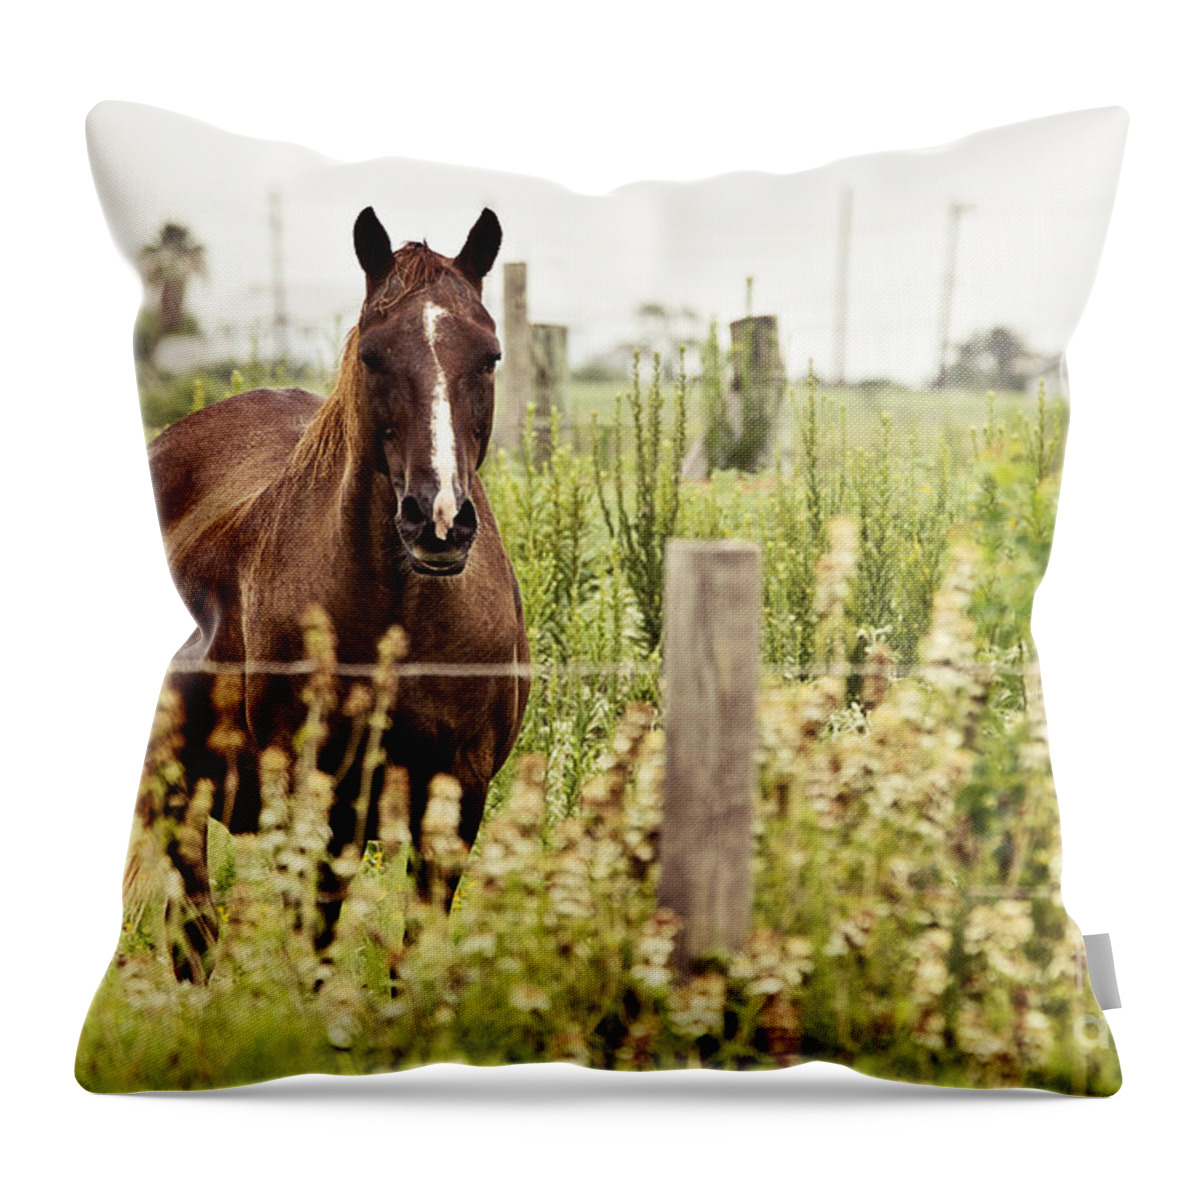 Horse Throw Pillow featuring the photograph The Stare by Scott Pellegrin